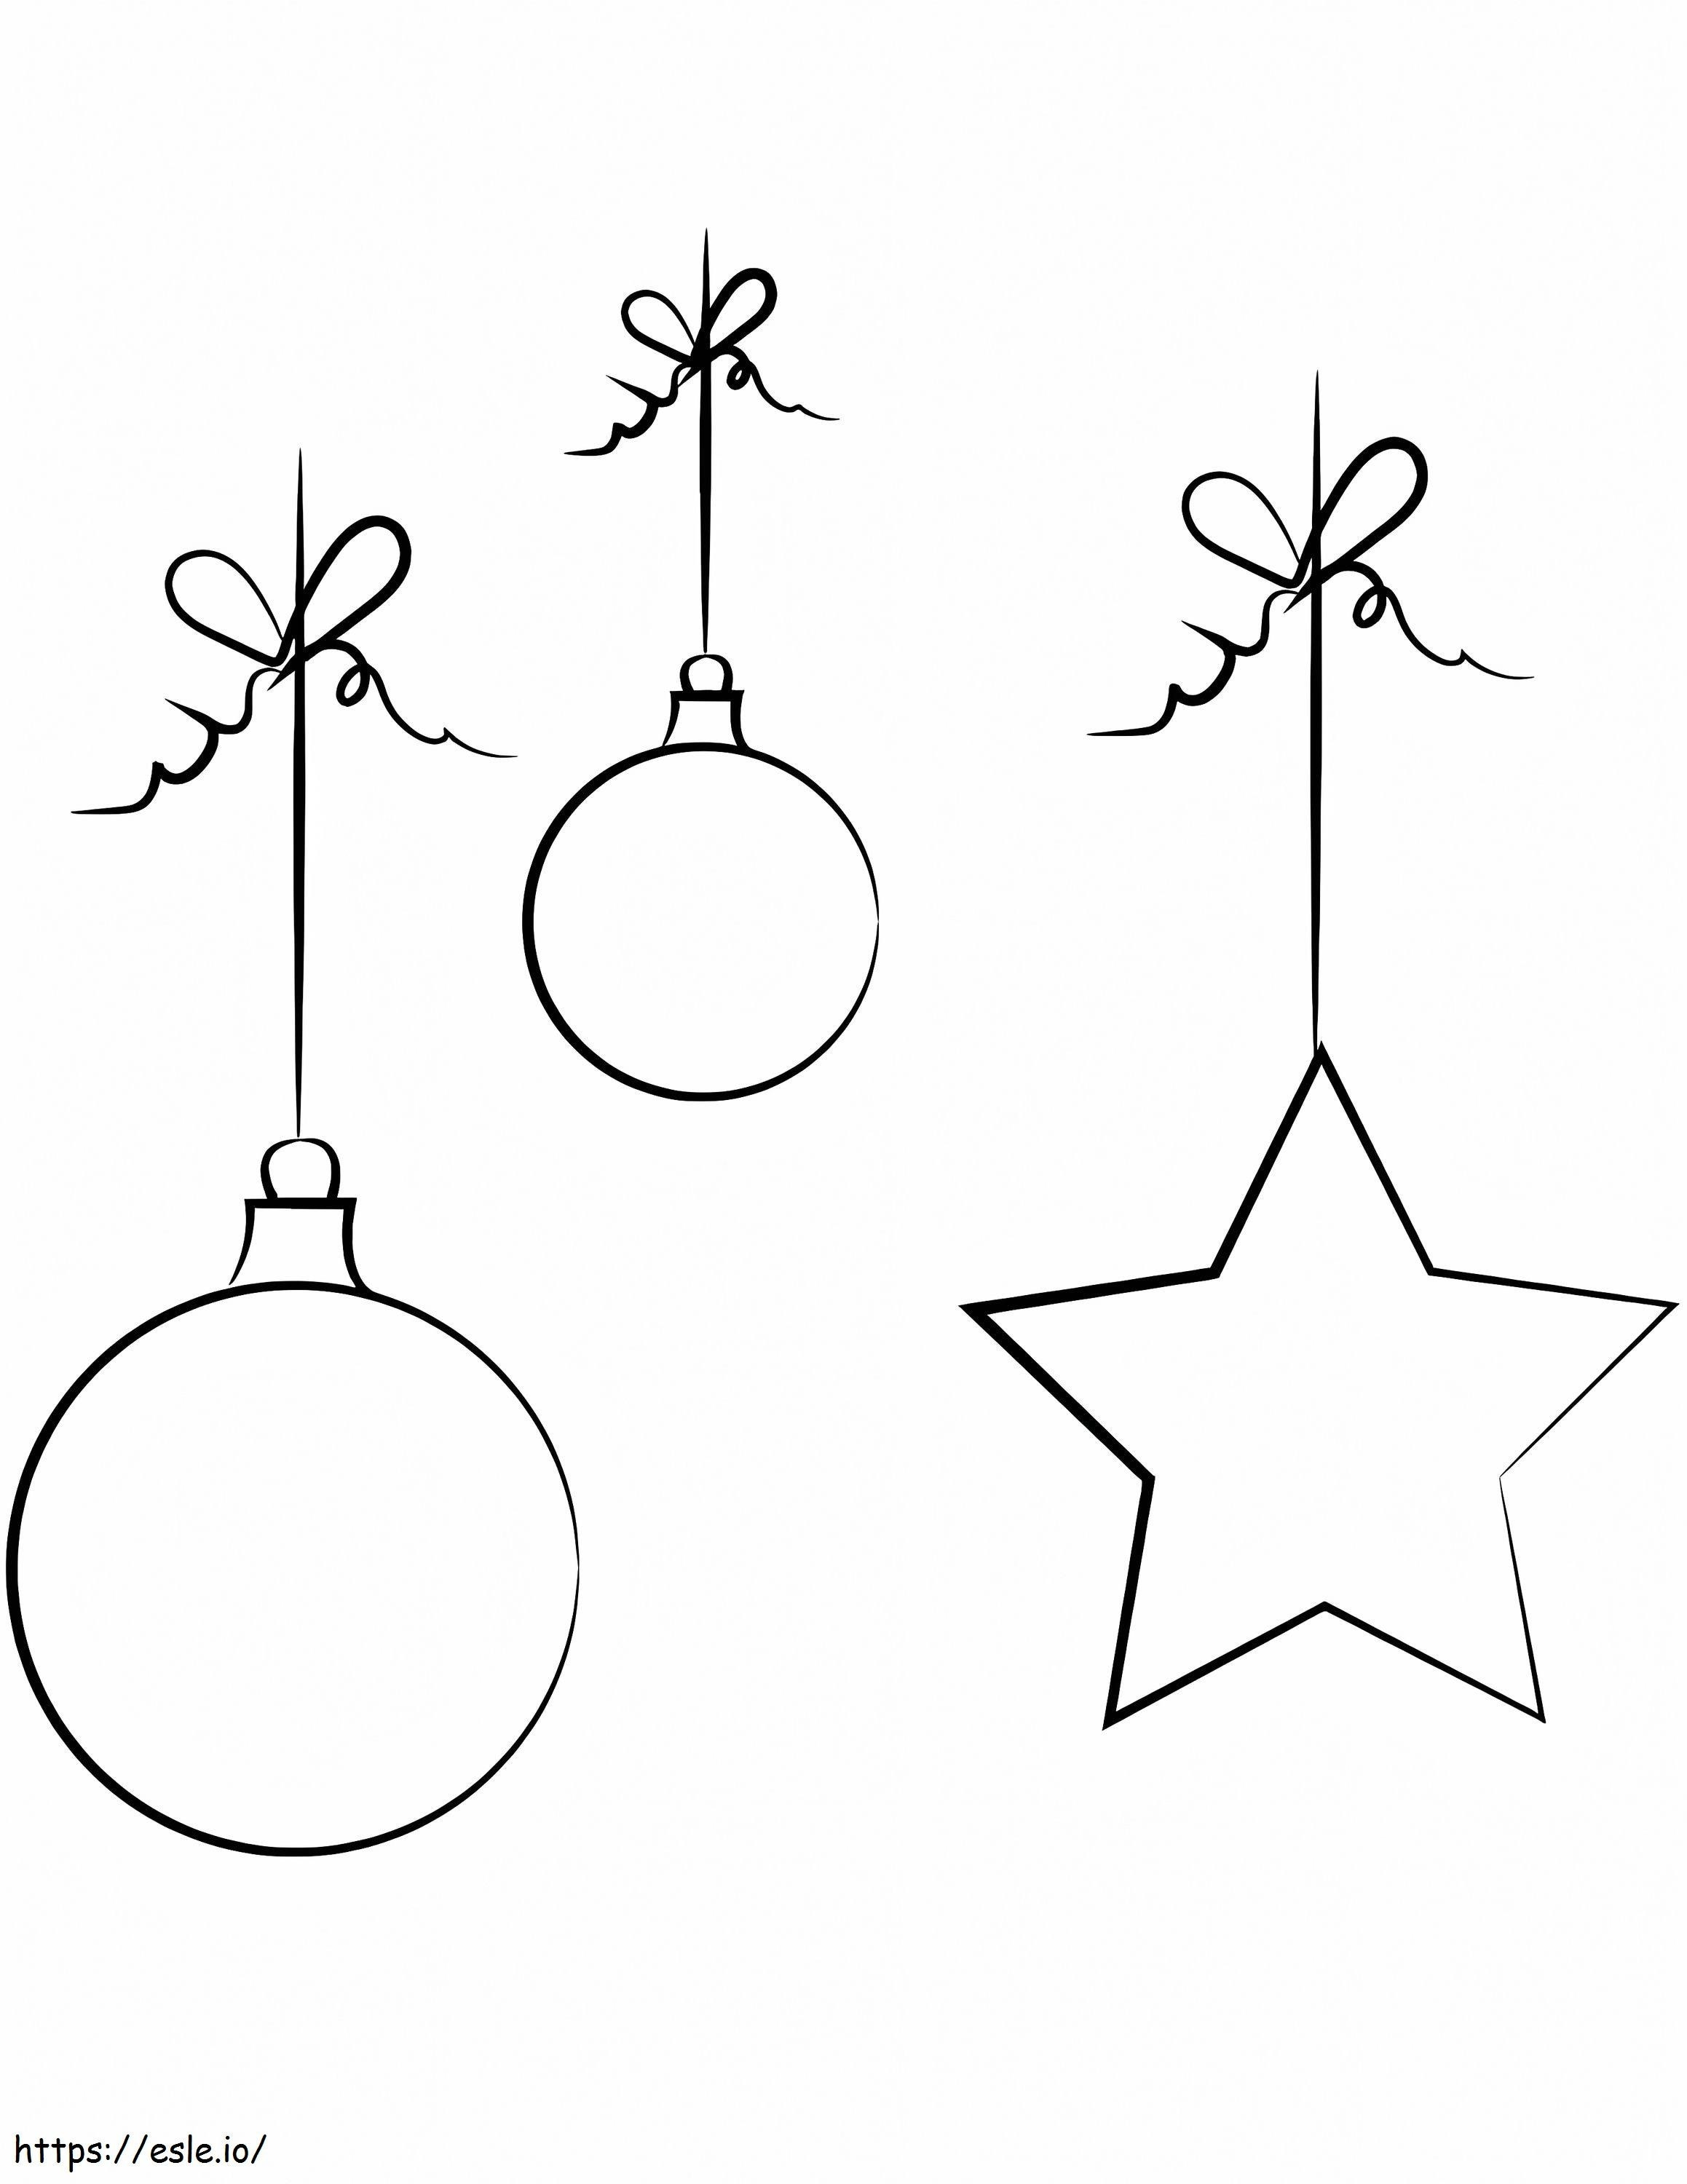 Christmas Ornatment coloring page